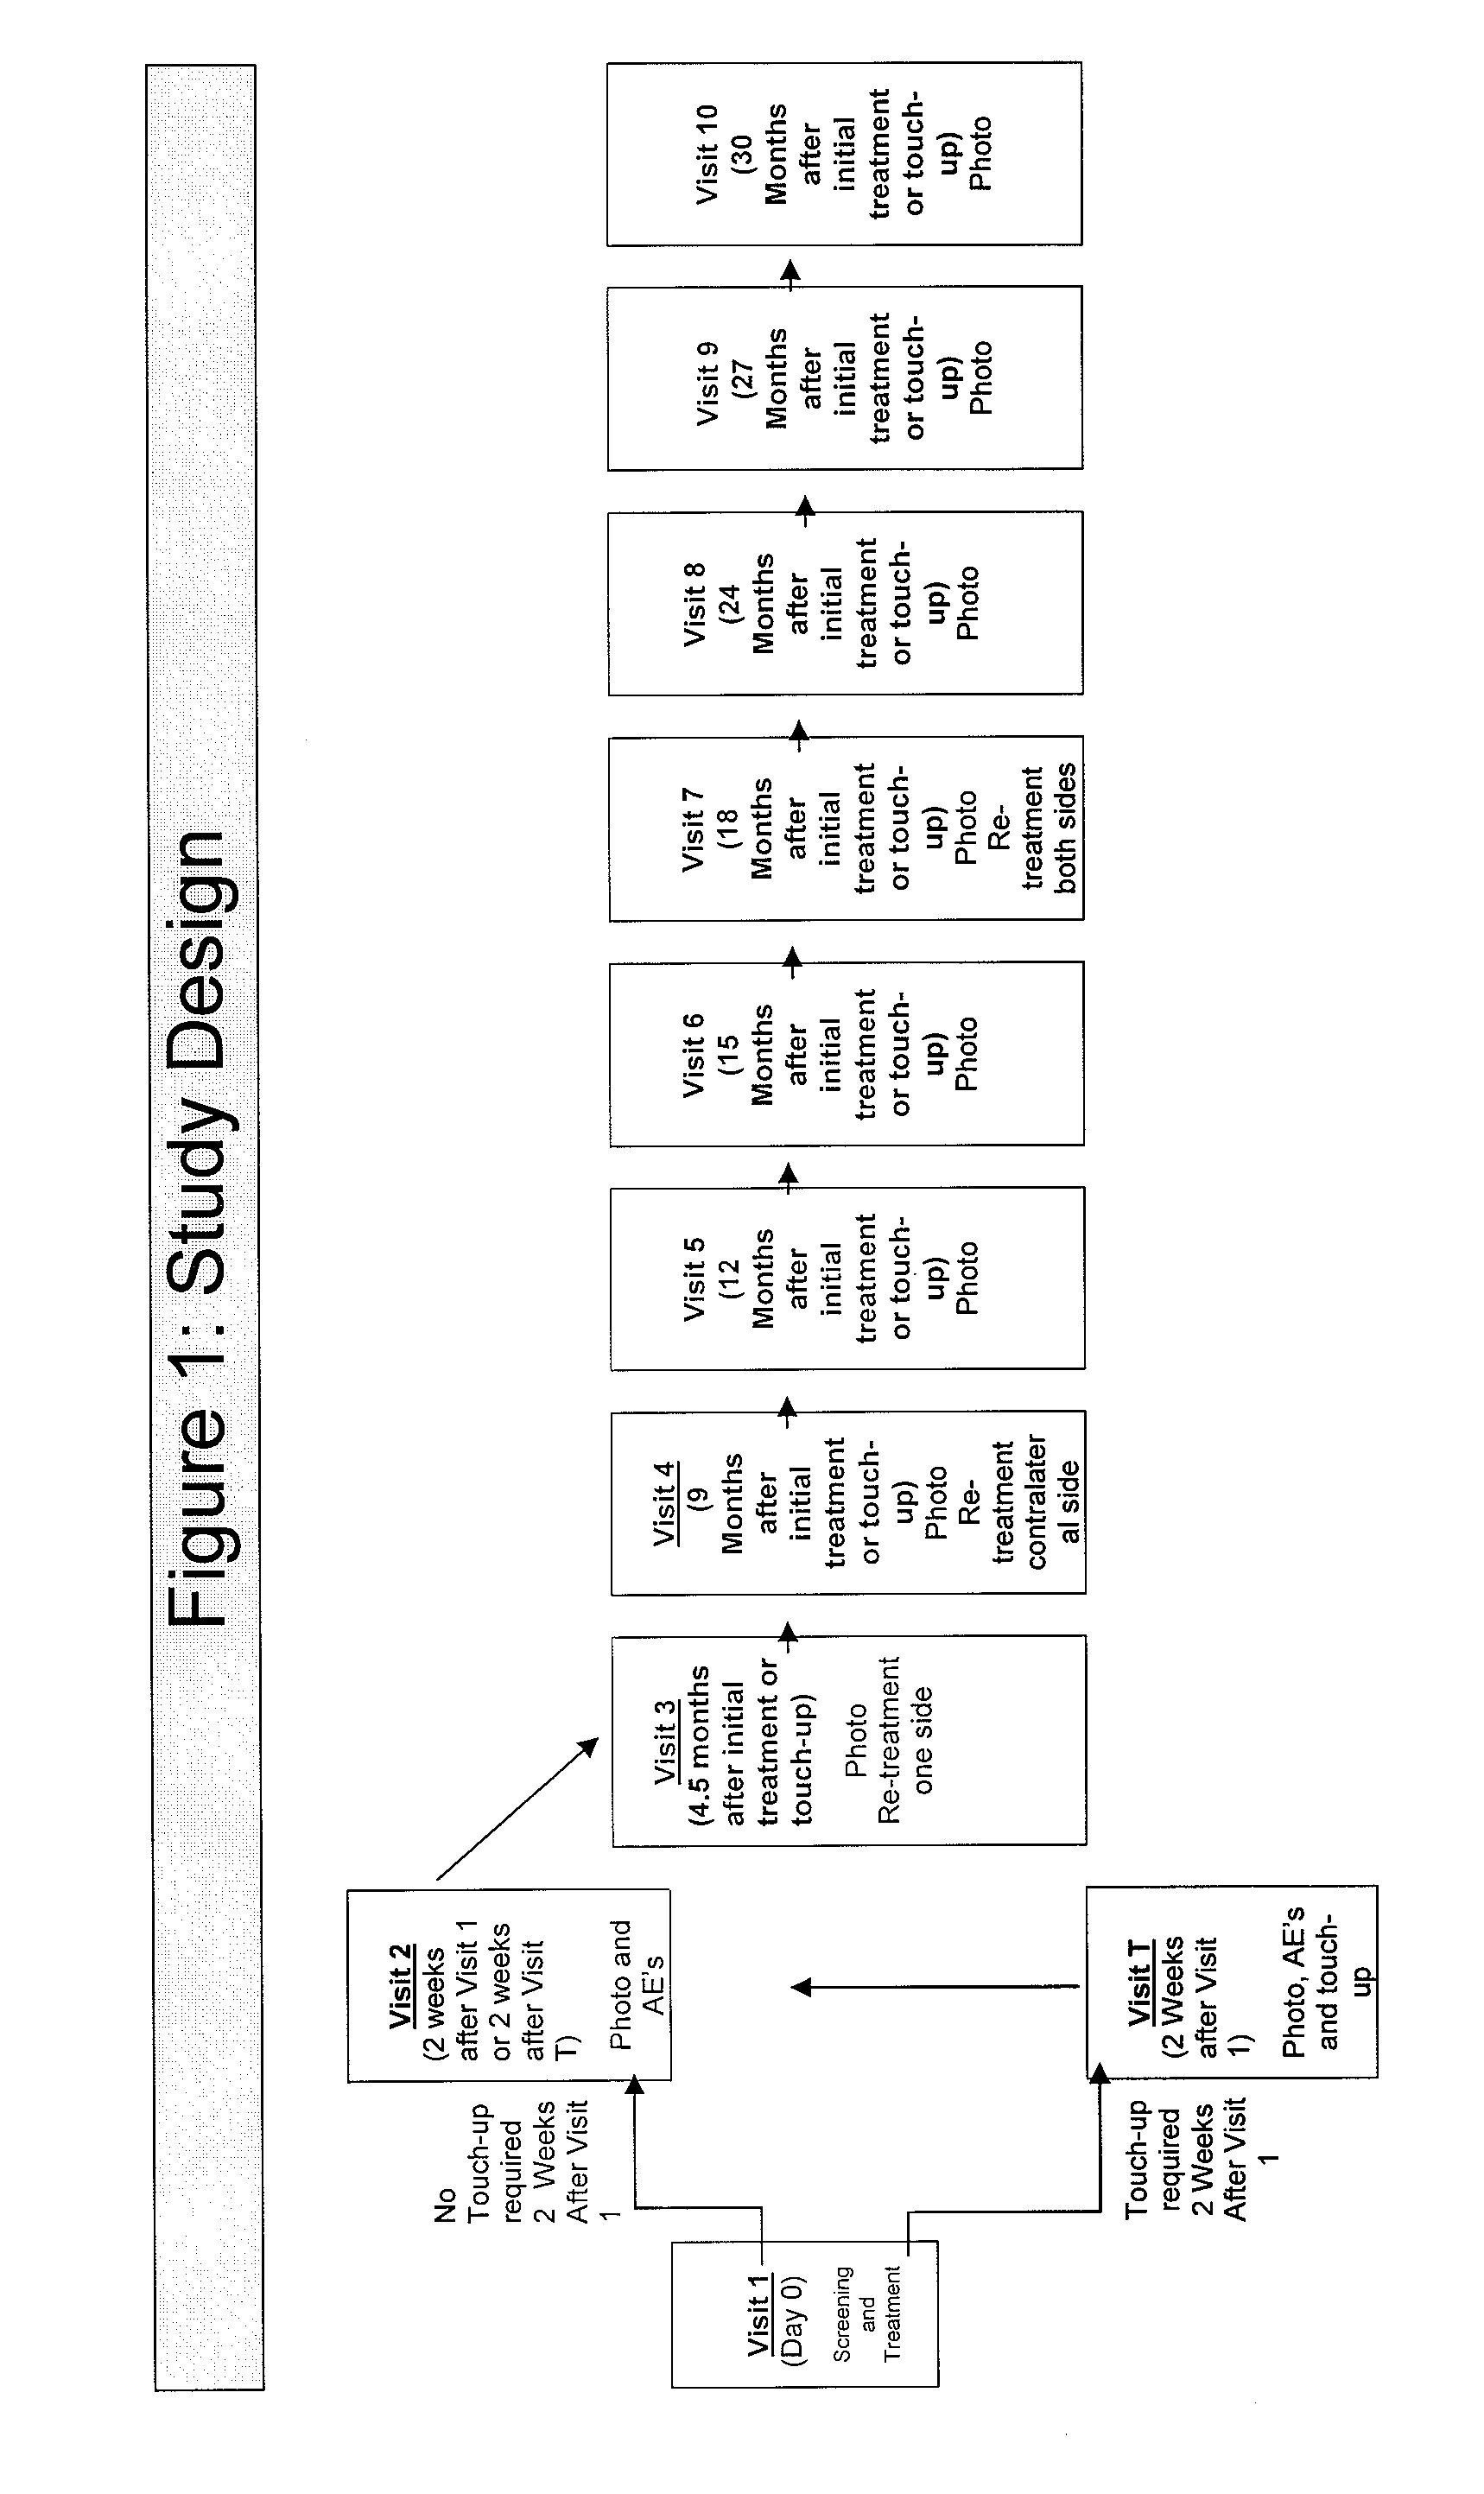 Method of applying an injectable filler